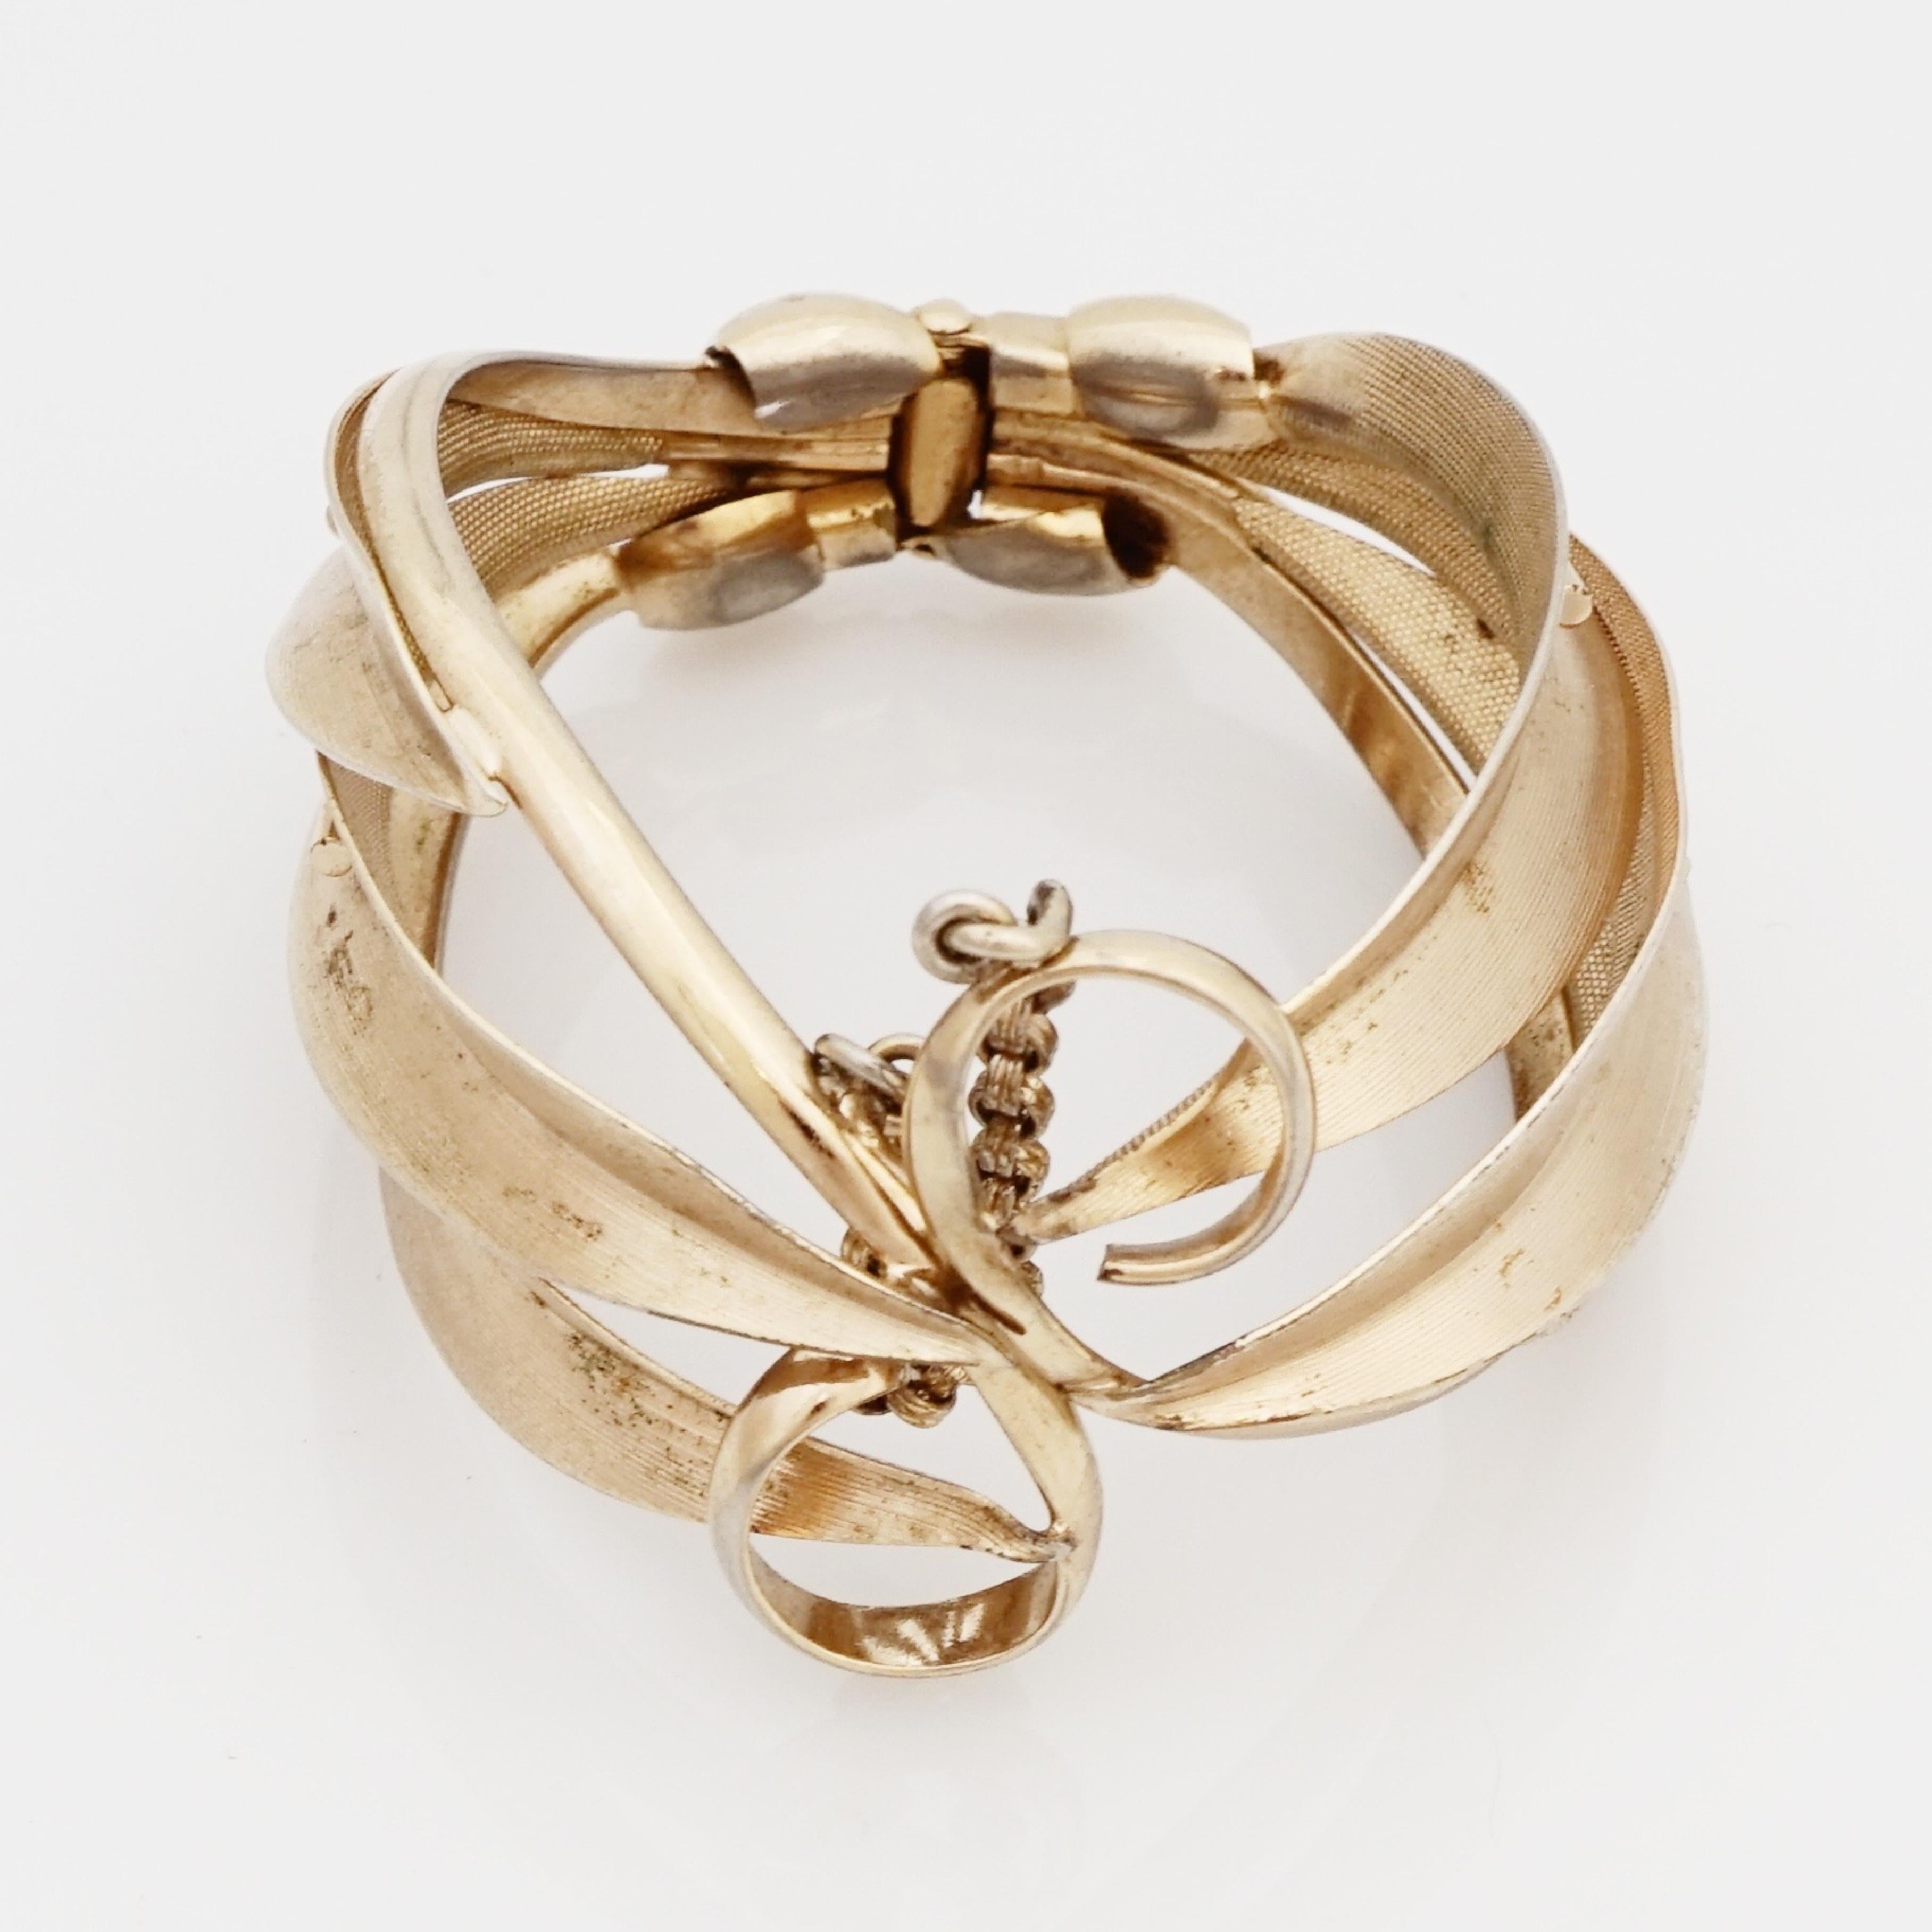 Modern Art Deco Gold Hinged Cuff Bracelet With S-Swirl Motif By Napier, 1920s For Sale